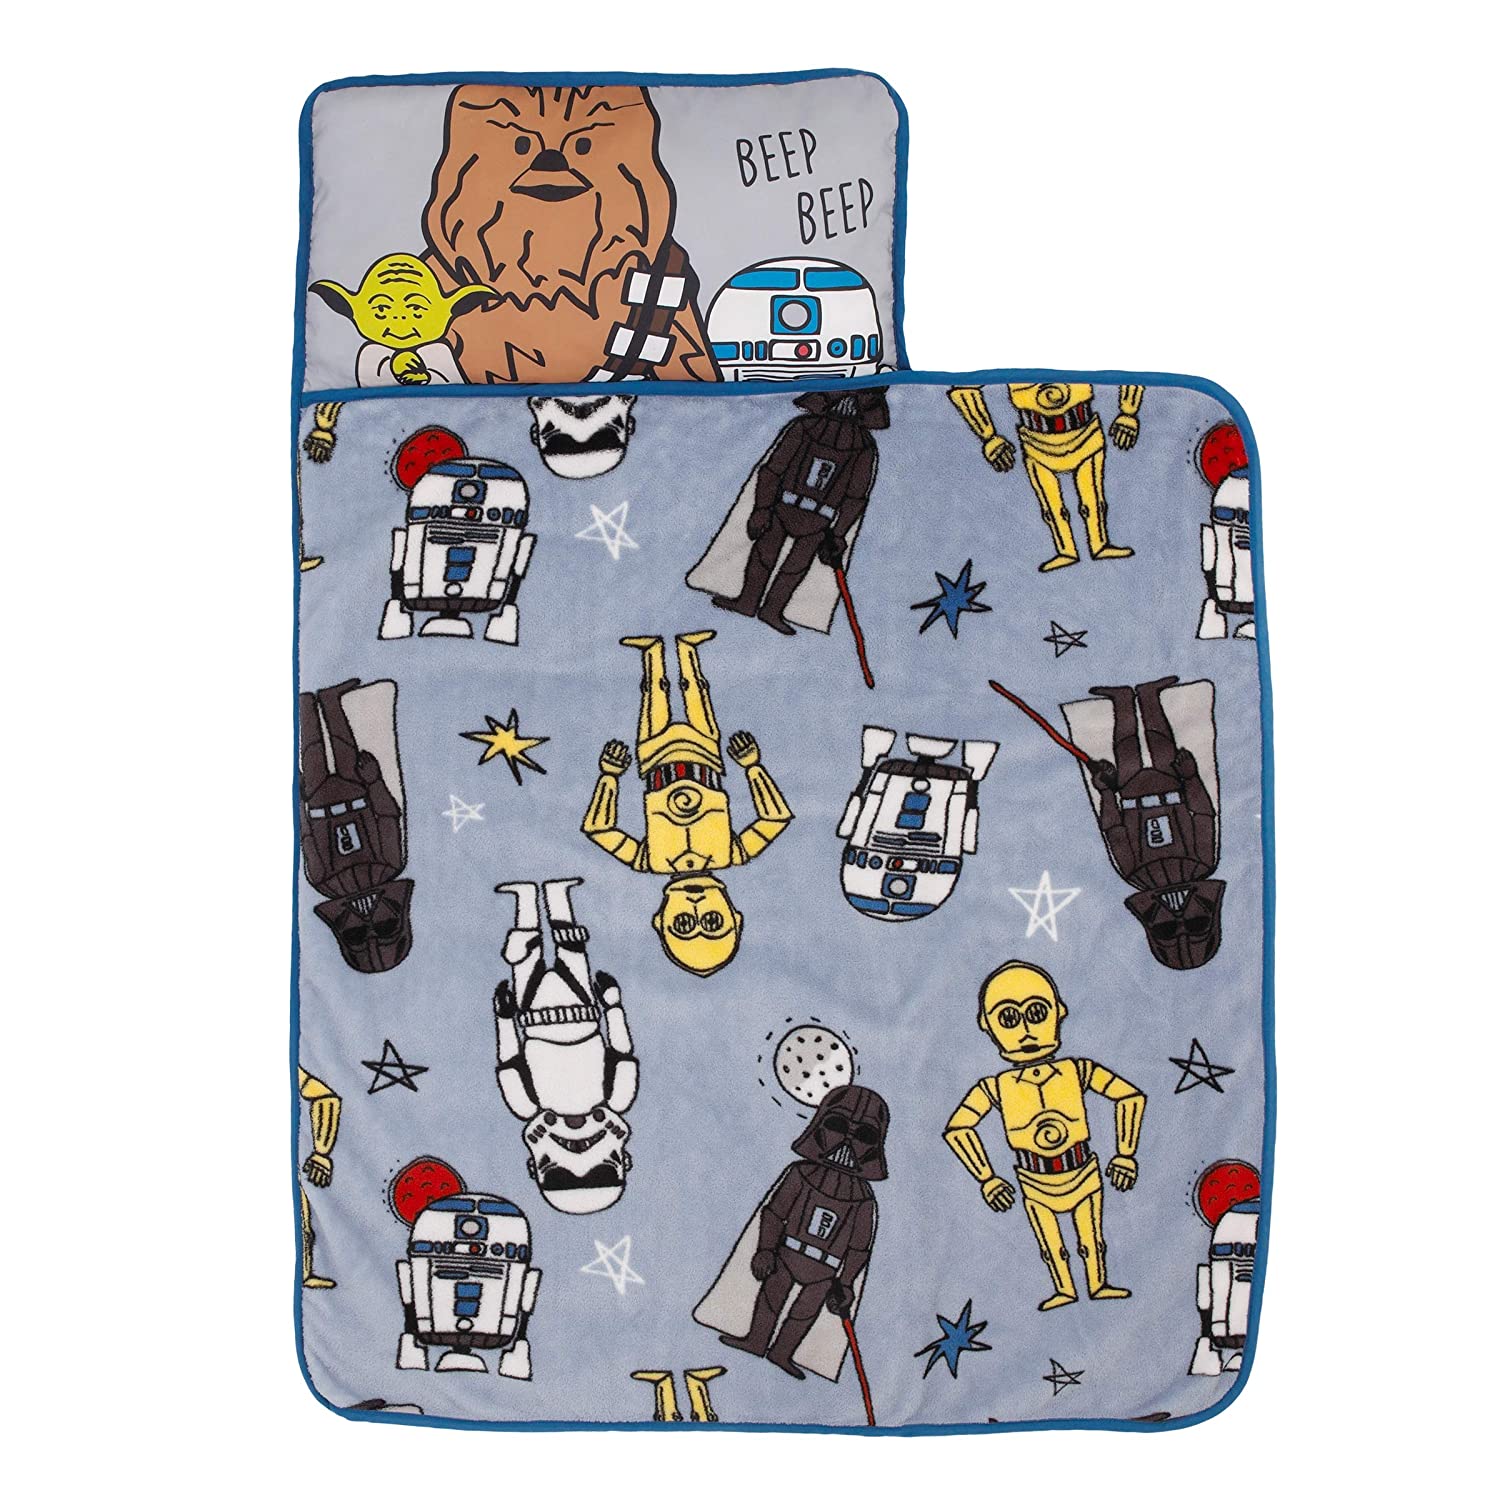 Disney Star Wars Rule The Galaxy Blue, Grey, White Toddler Nap Mat - Perfect For Use As Your Toddler Grows